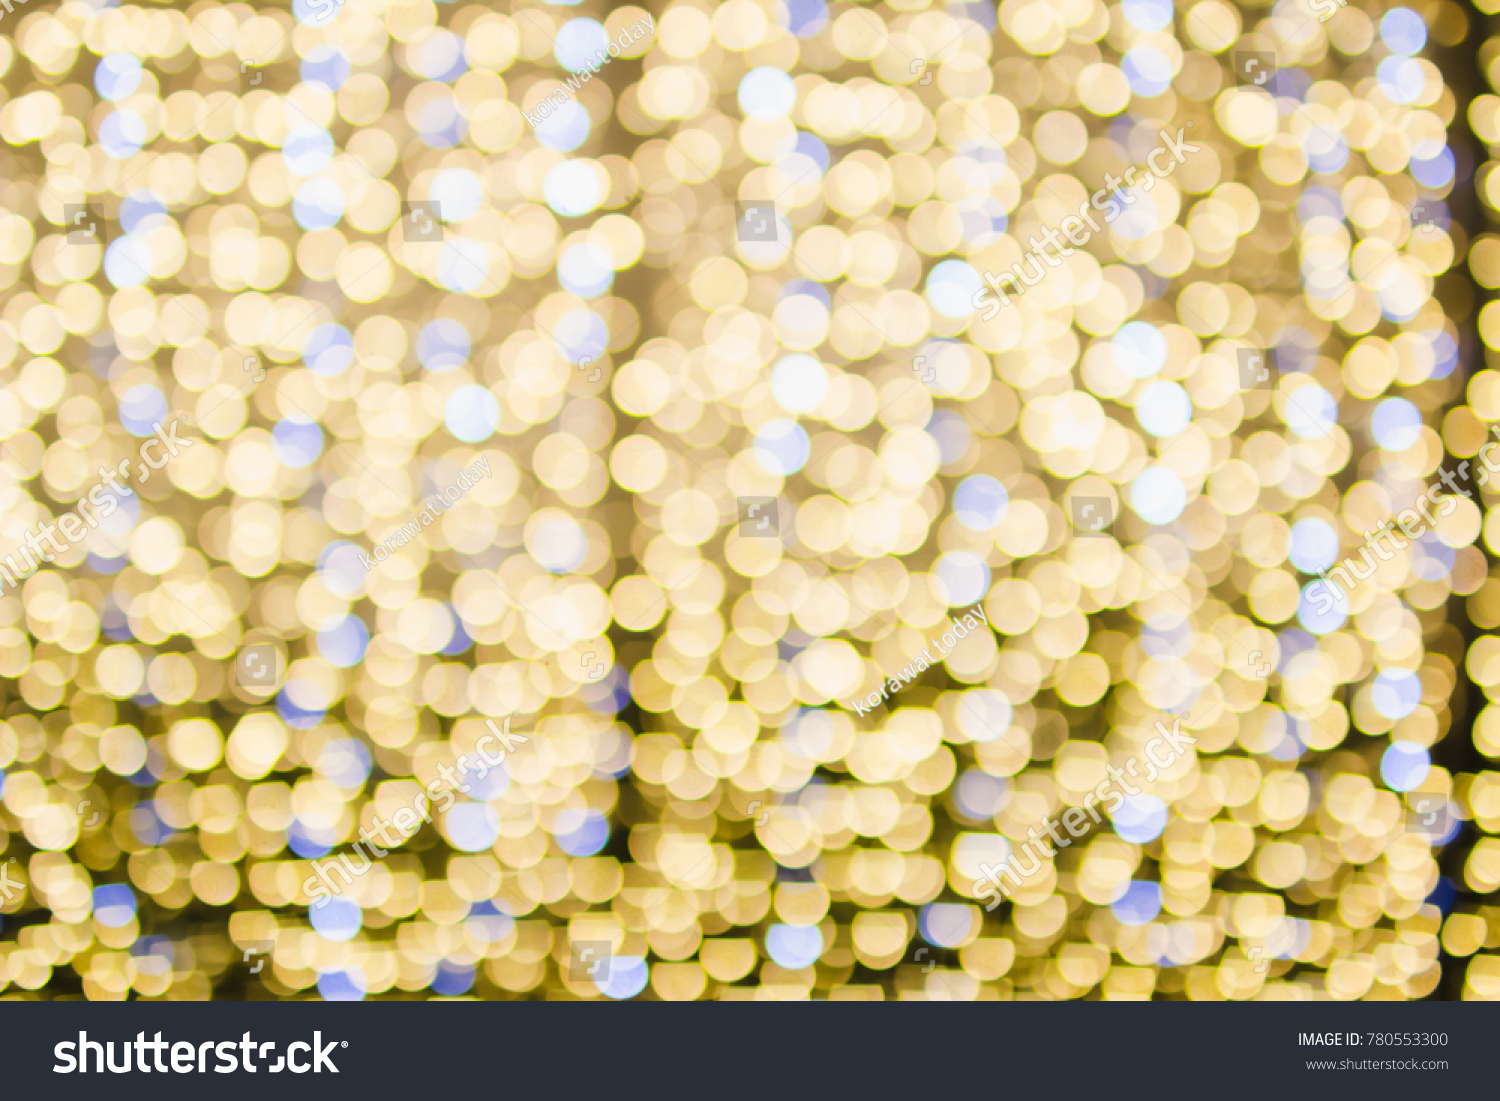 blurred photo,
A lot of lights are used to decorate and decorate the Christmas season and the New Year.
Background images of colorful lights at night for use as copy space based on their own ideas. #780553300